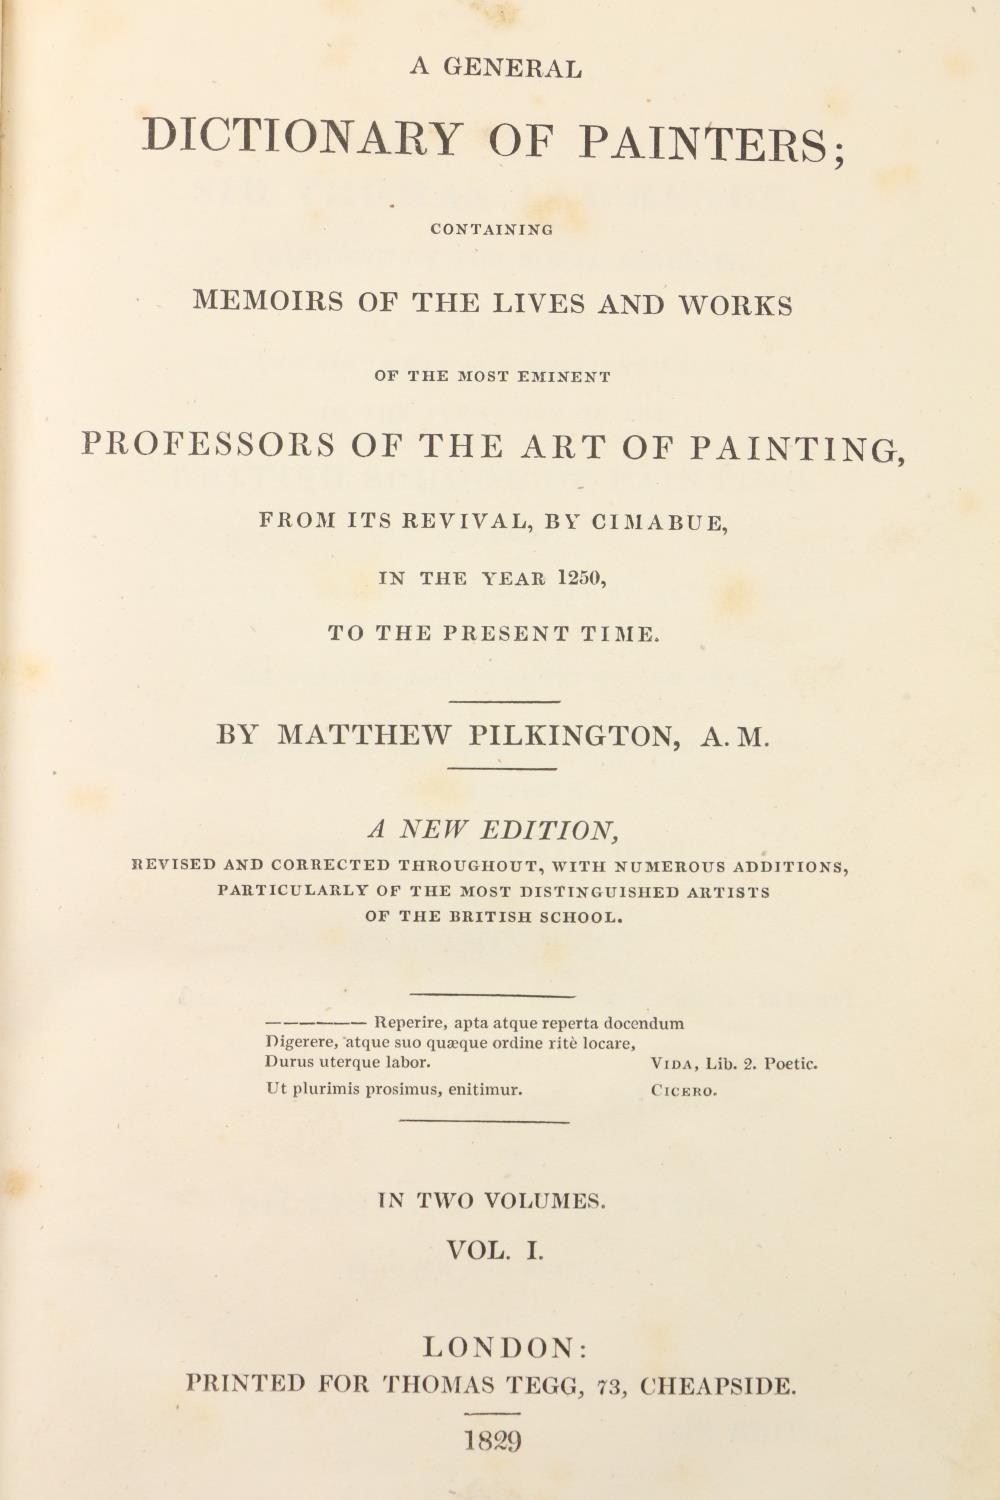 Pilkington (Matthew) A General Dictionary of Painters, 2 vols. 8vo Lond. 1829. New Edn., cont. hf. - Image 2 of 2